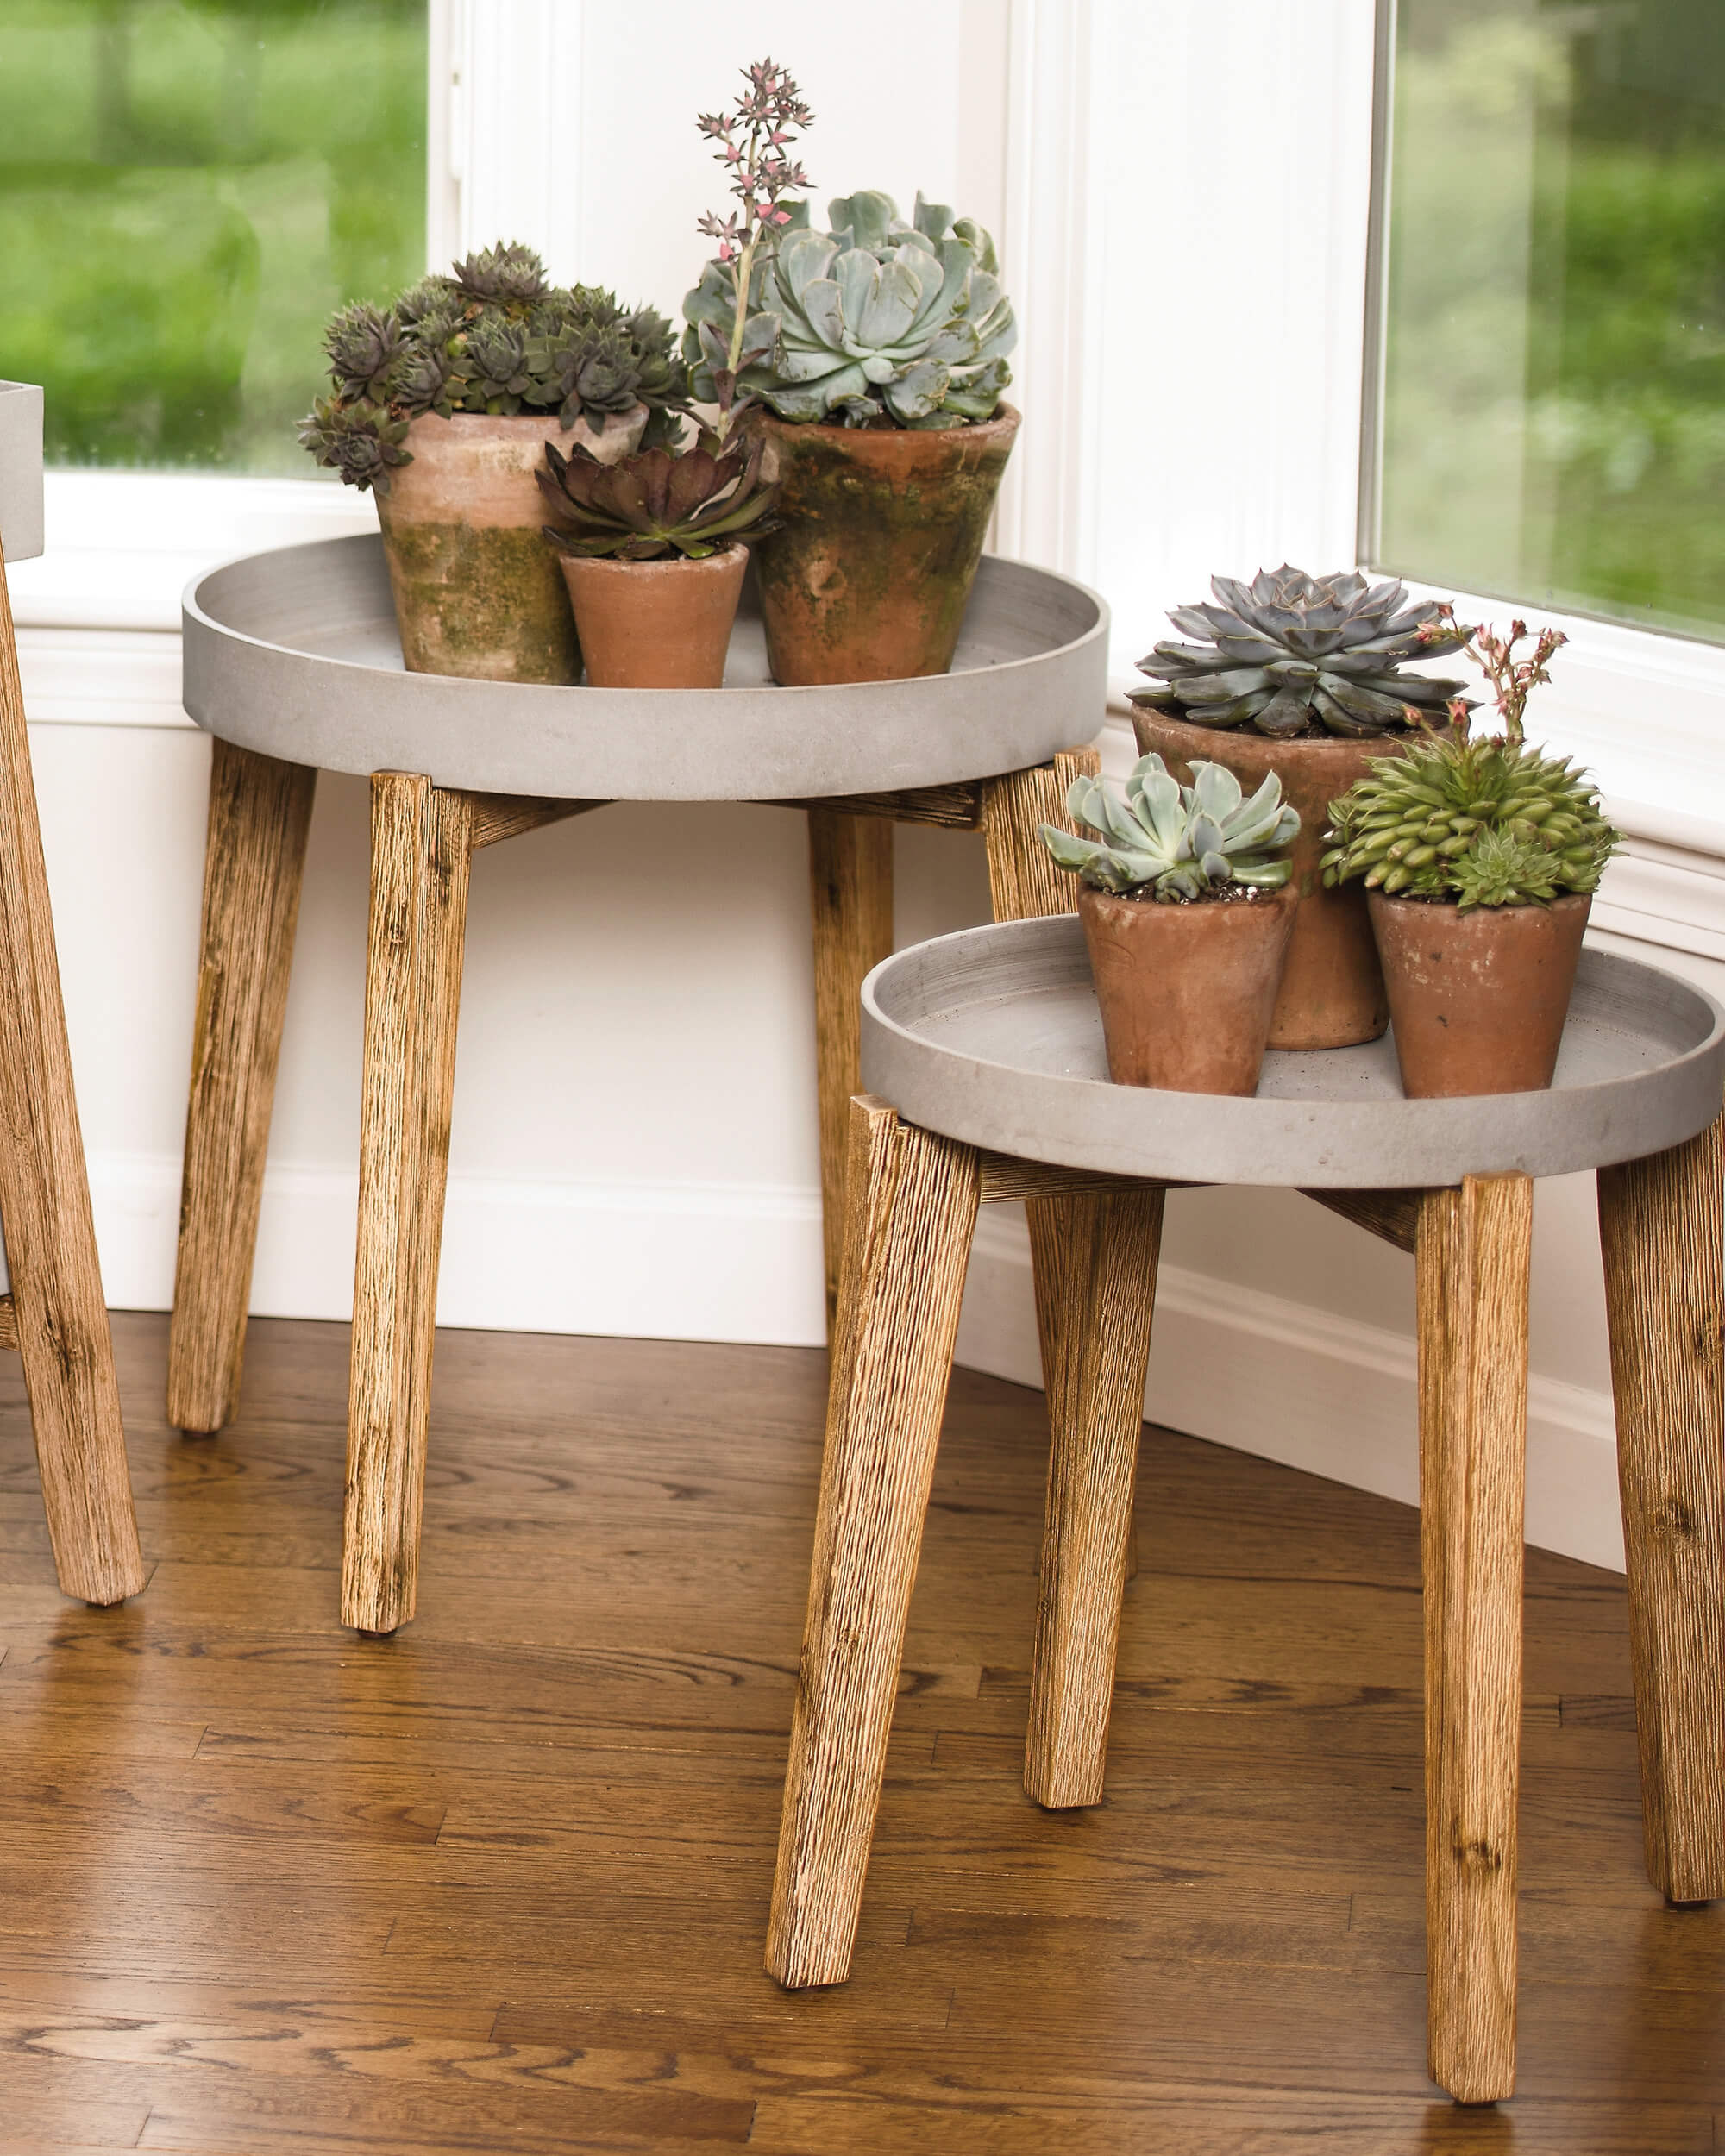 _terra-round-plant-tables-stand-acacia-wood-with-sandstone-tray